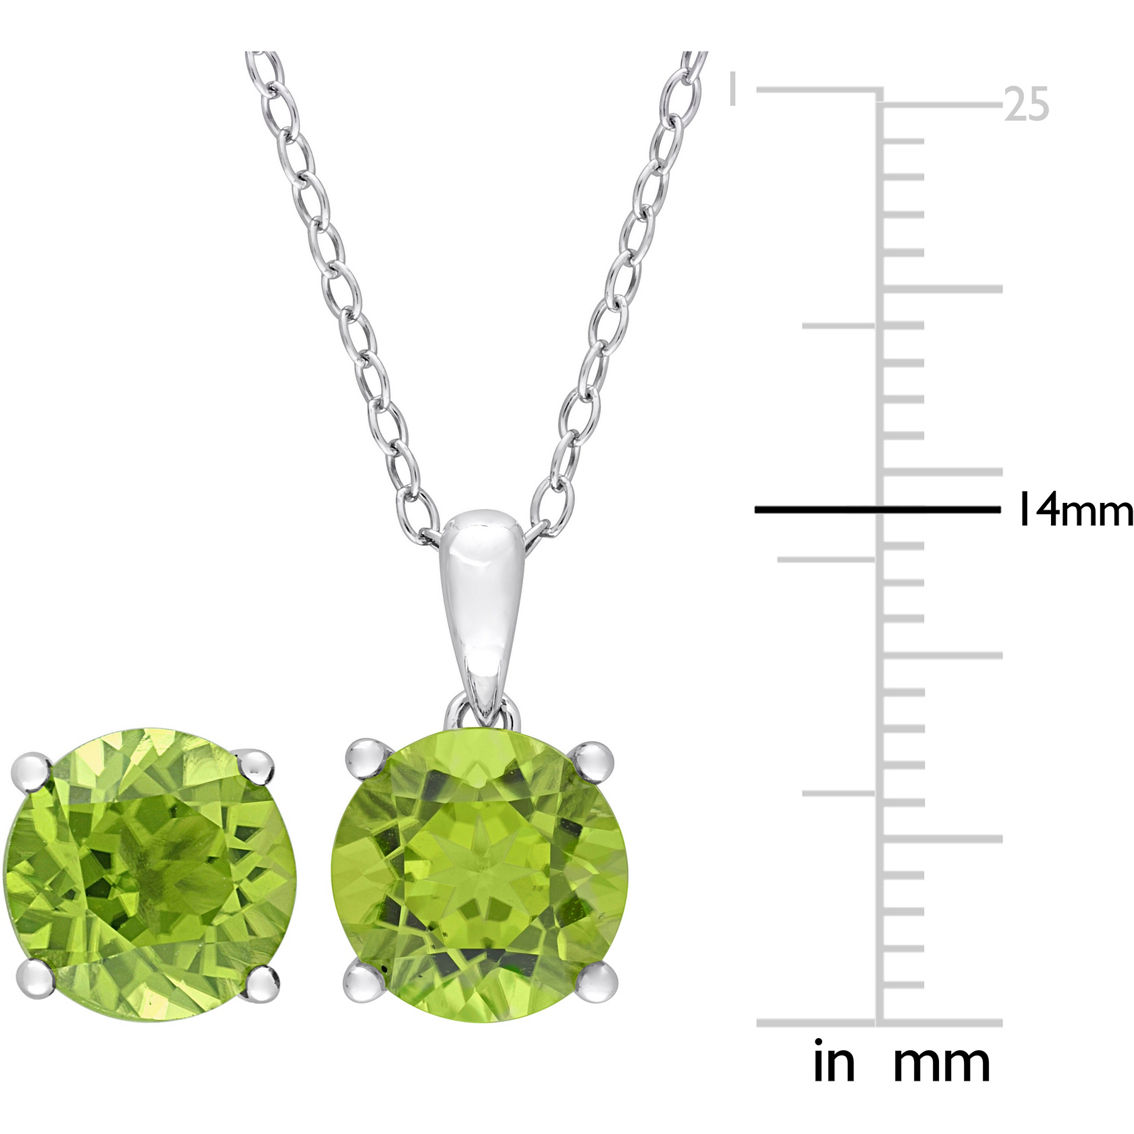 Sofia B. 2pc Set Peridot Solitaire Necklace and Stud Earrings in Sterling Silver - Image 4 of 4